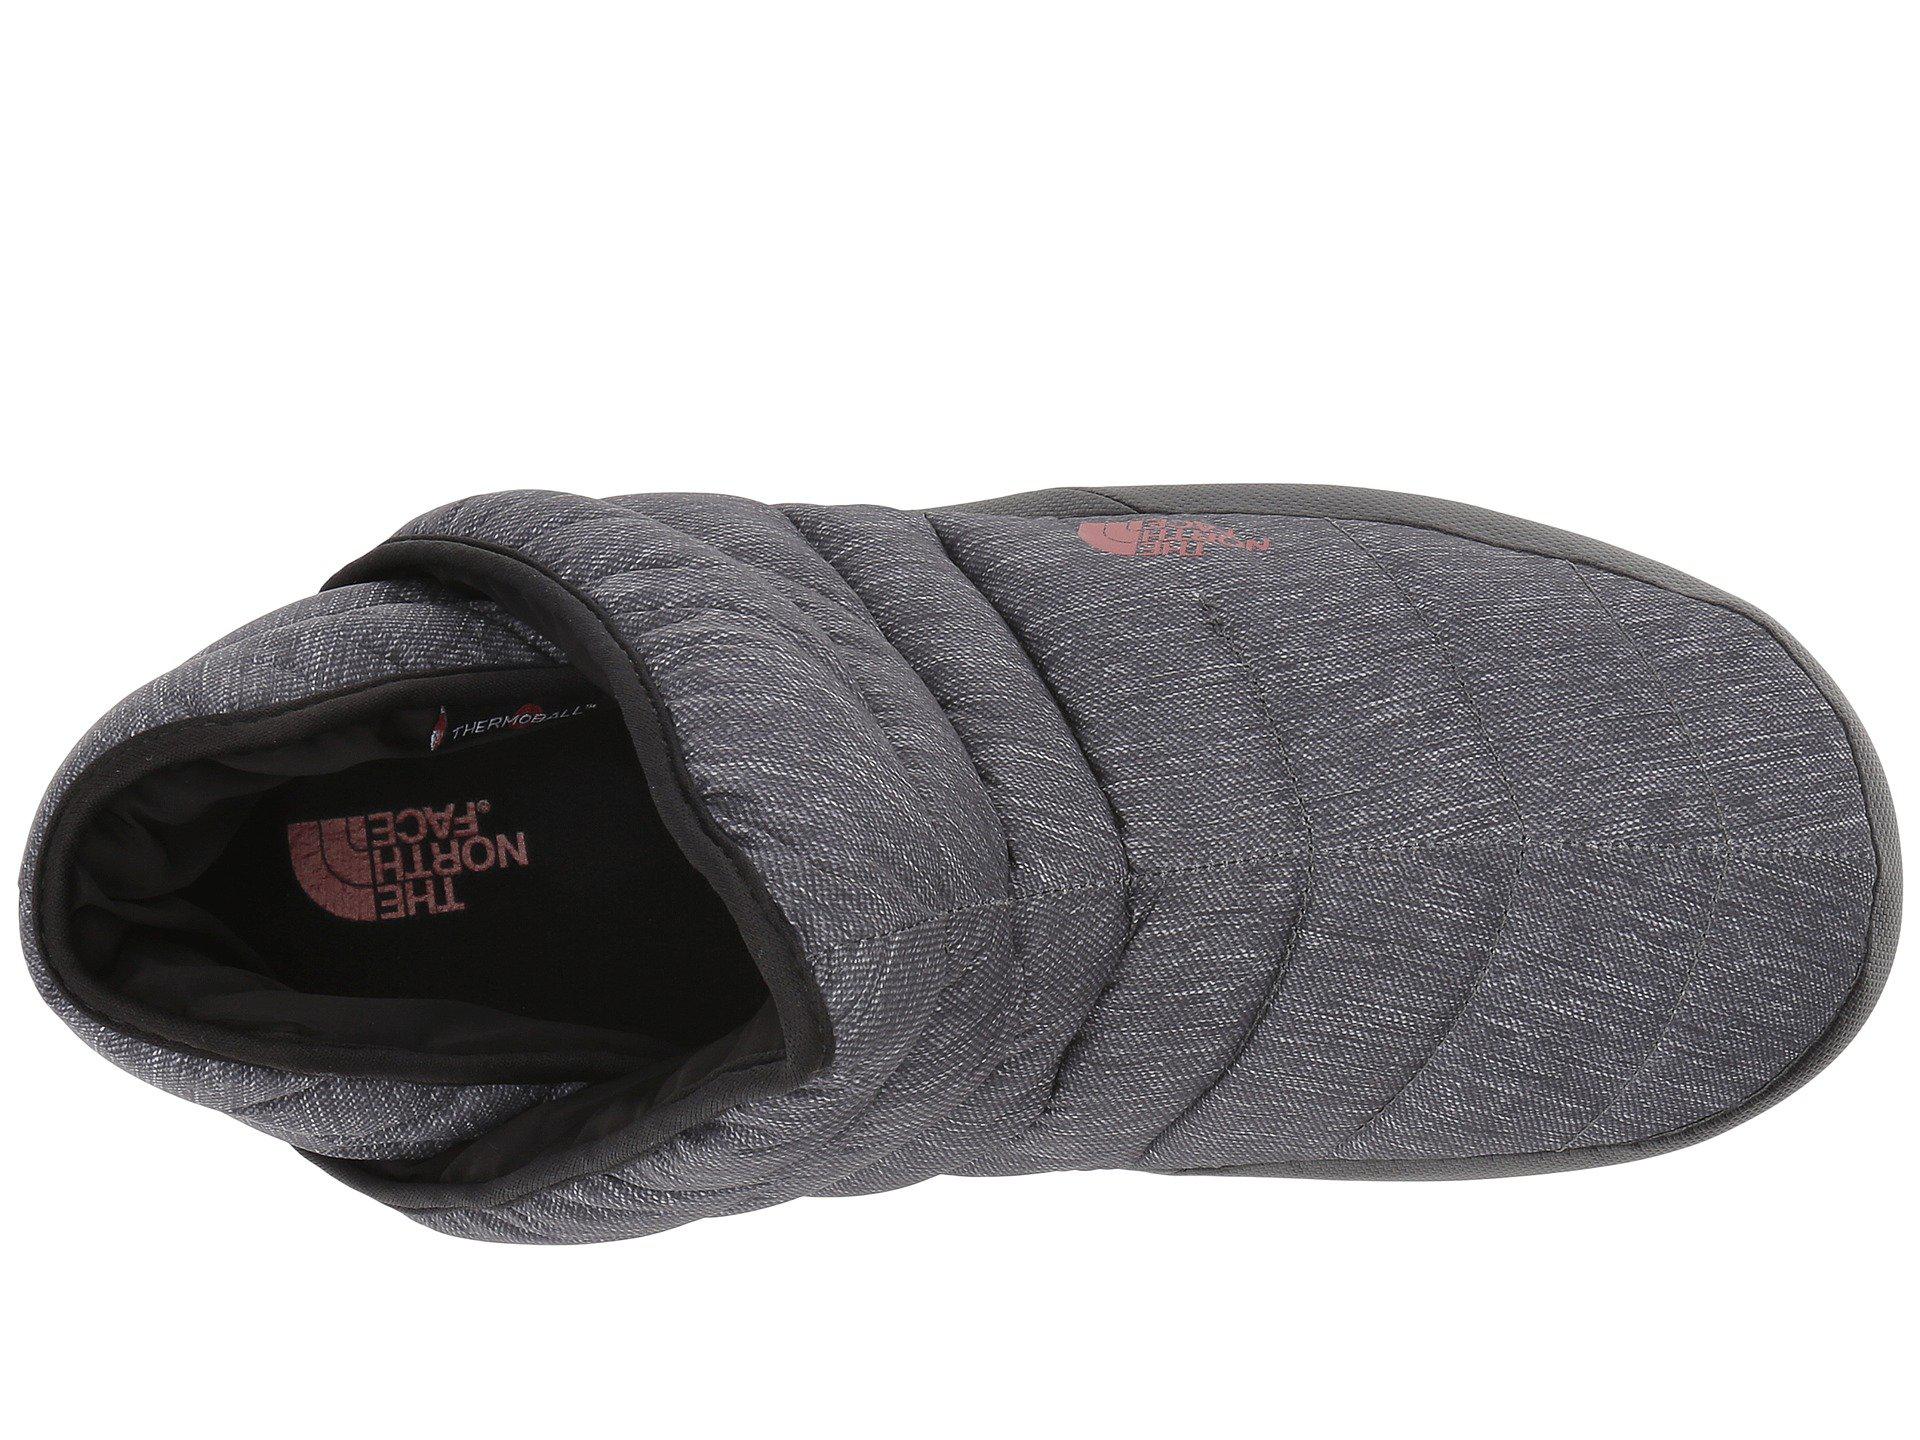 Buy > the north face thermoball traction booties > in stock